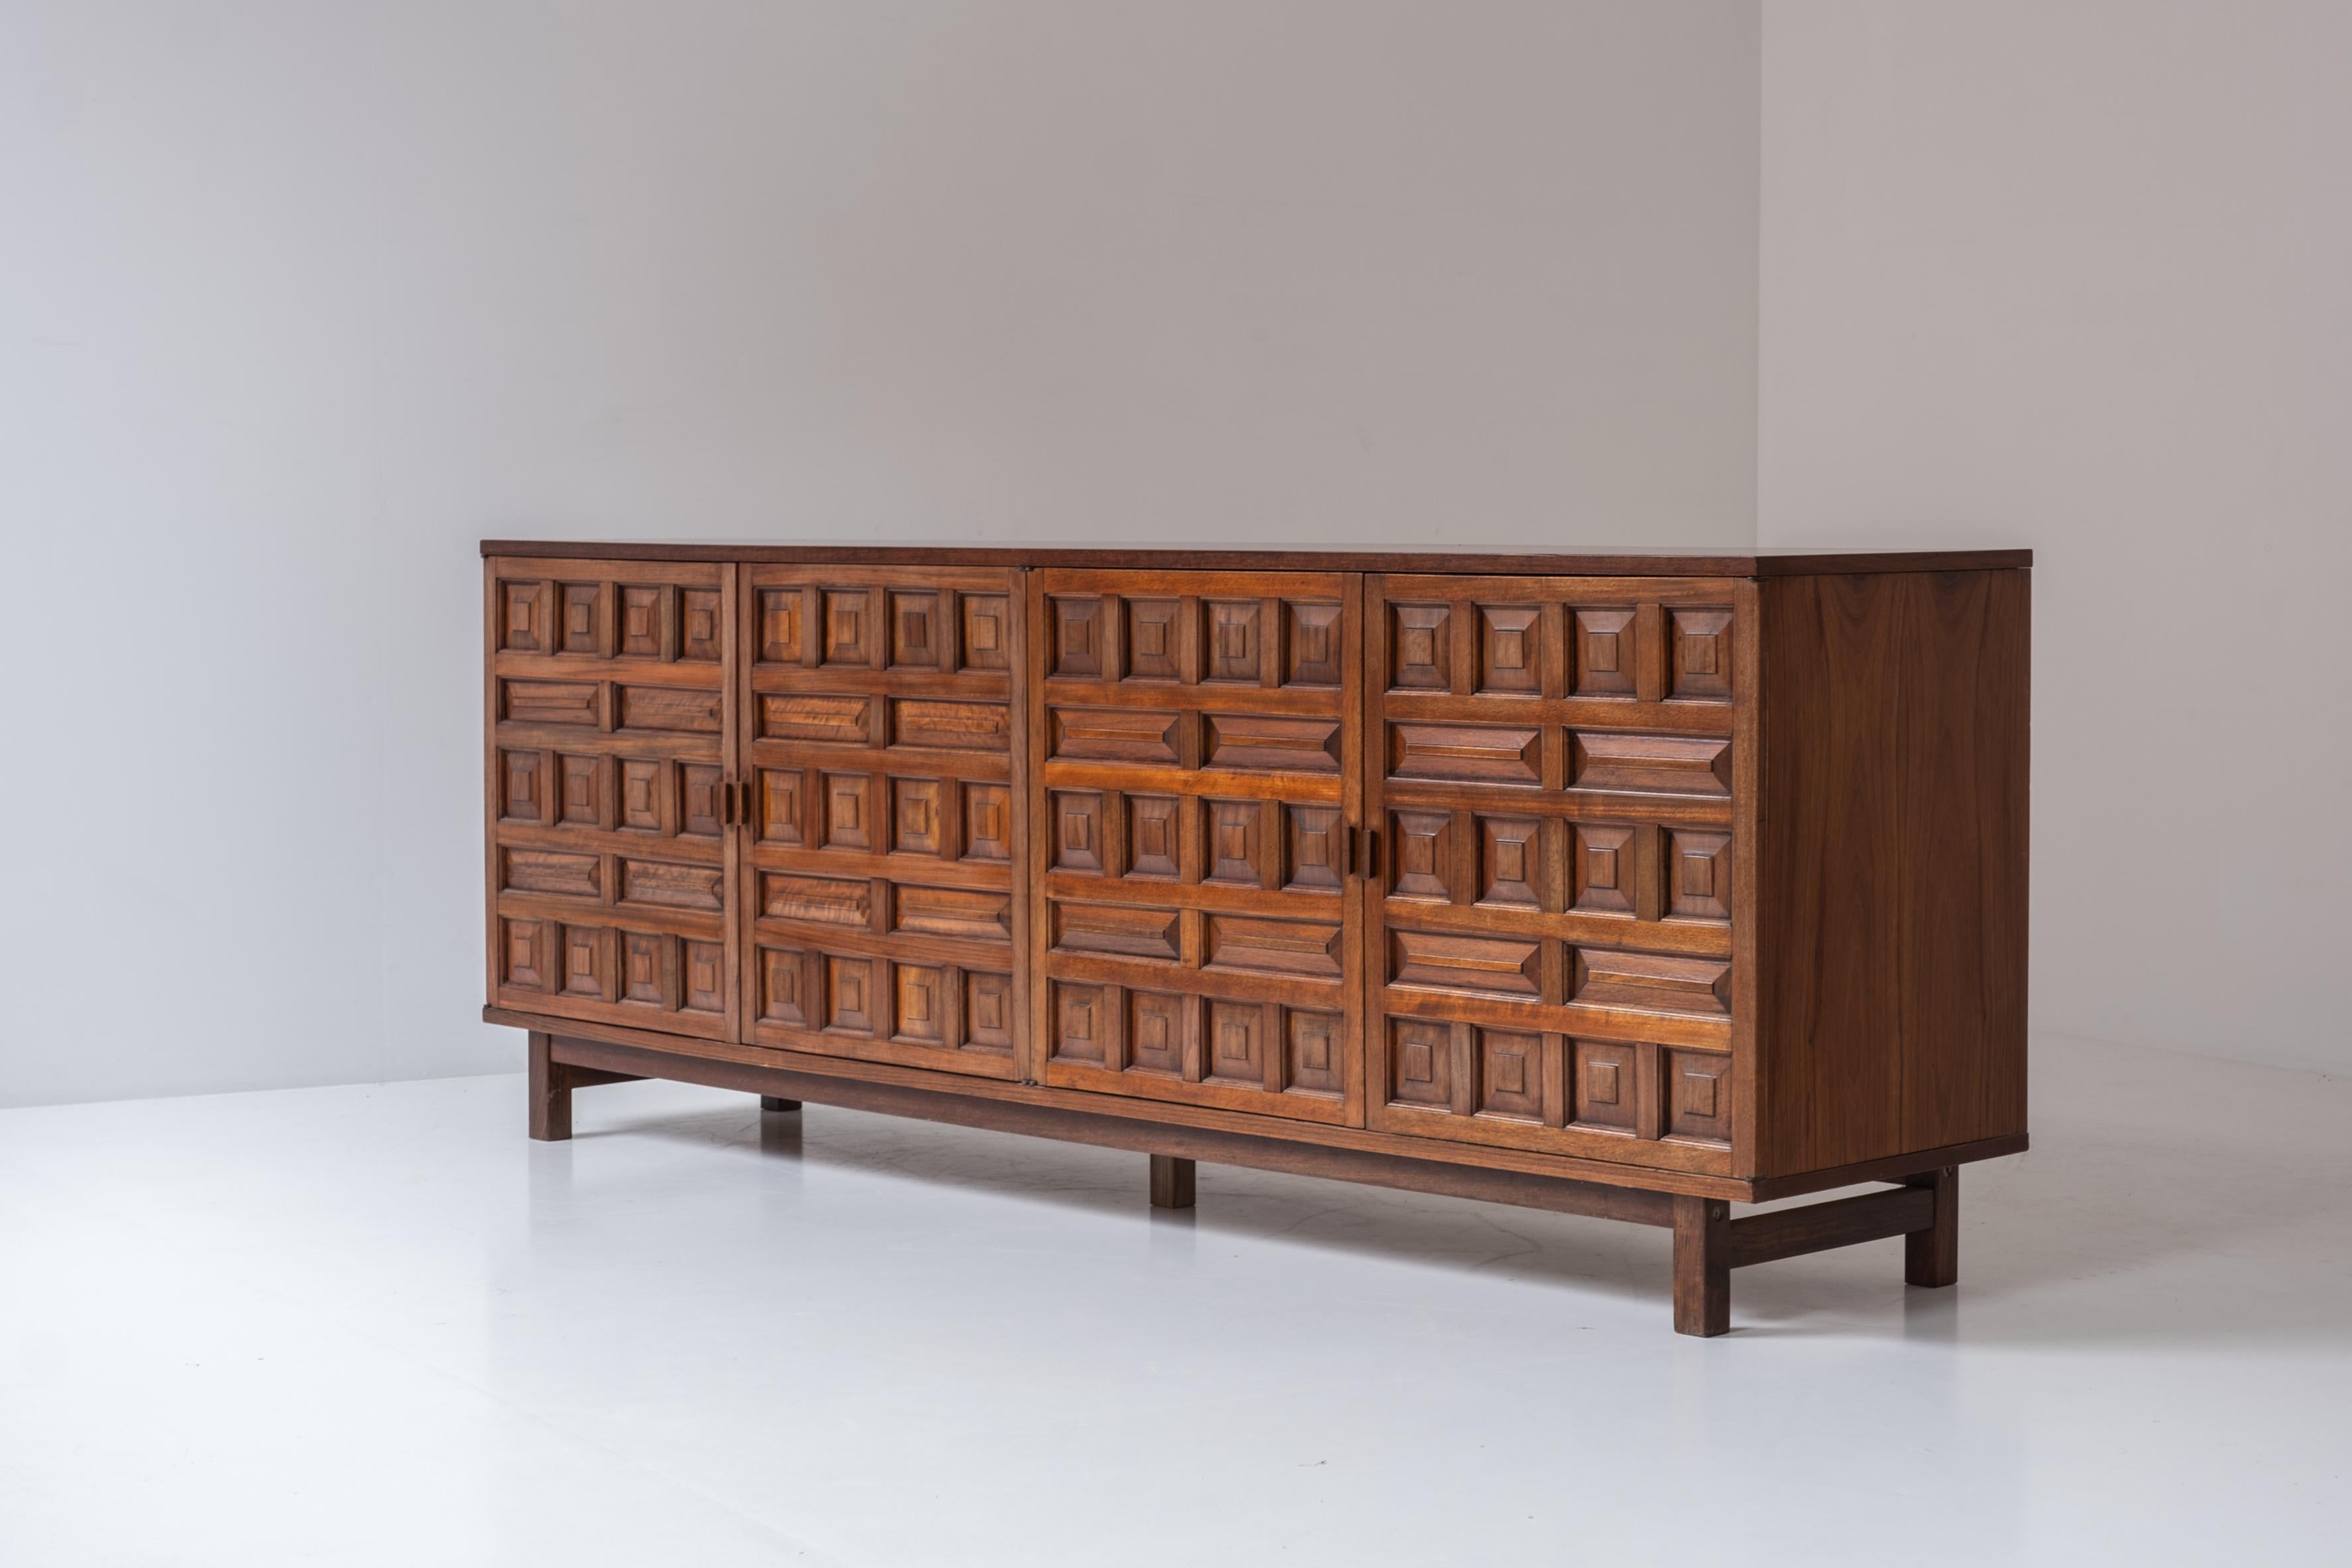 Brutalist sideboard from Spain, designed and manufactured in the 1970s. 1